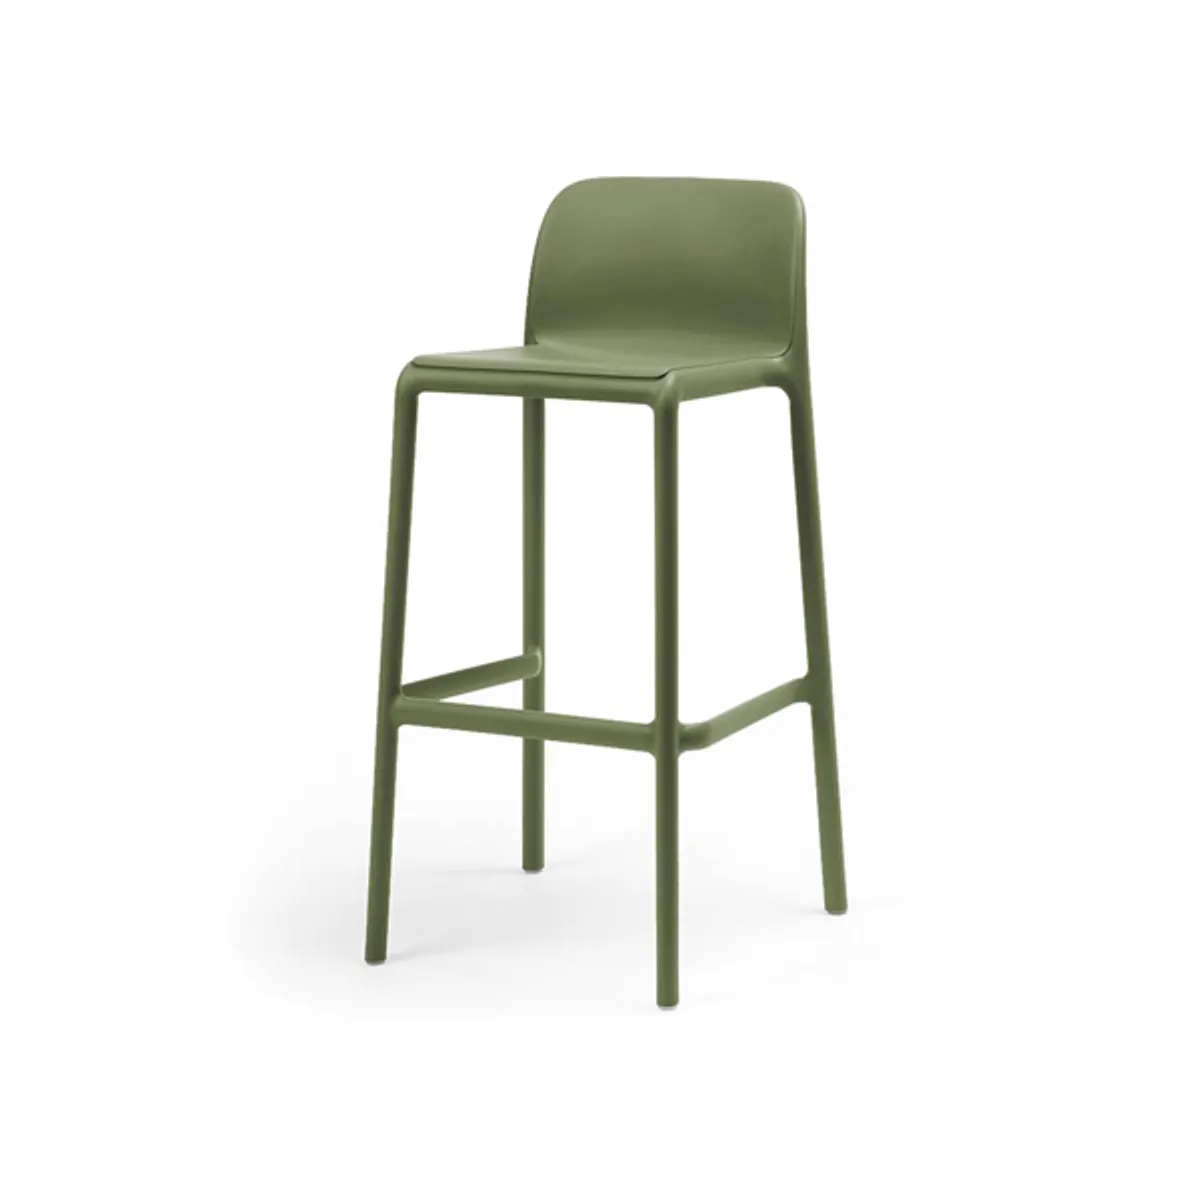 Faro bar stool Inside Out Contracts6